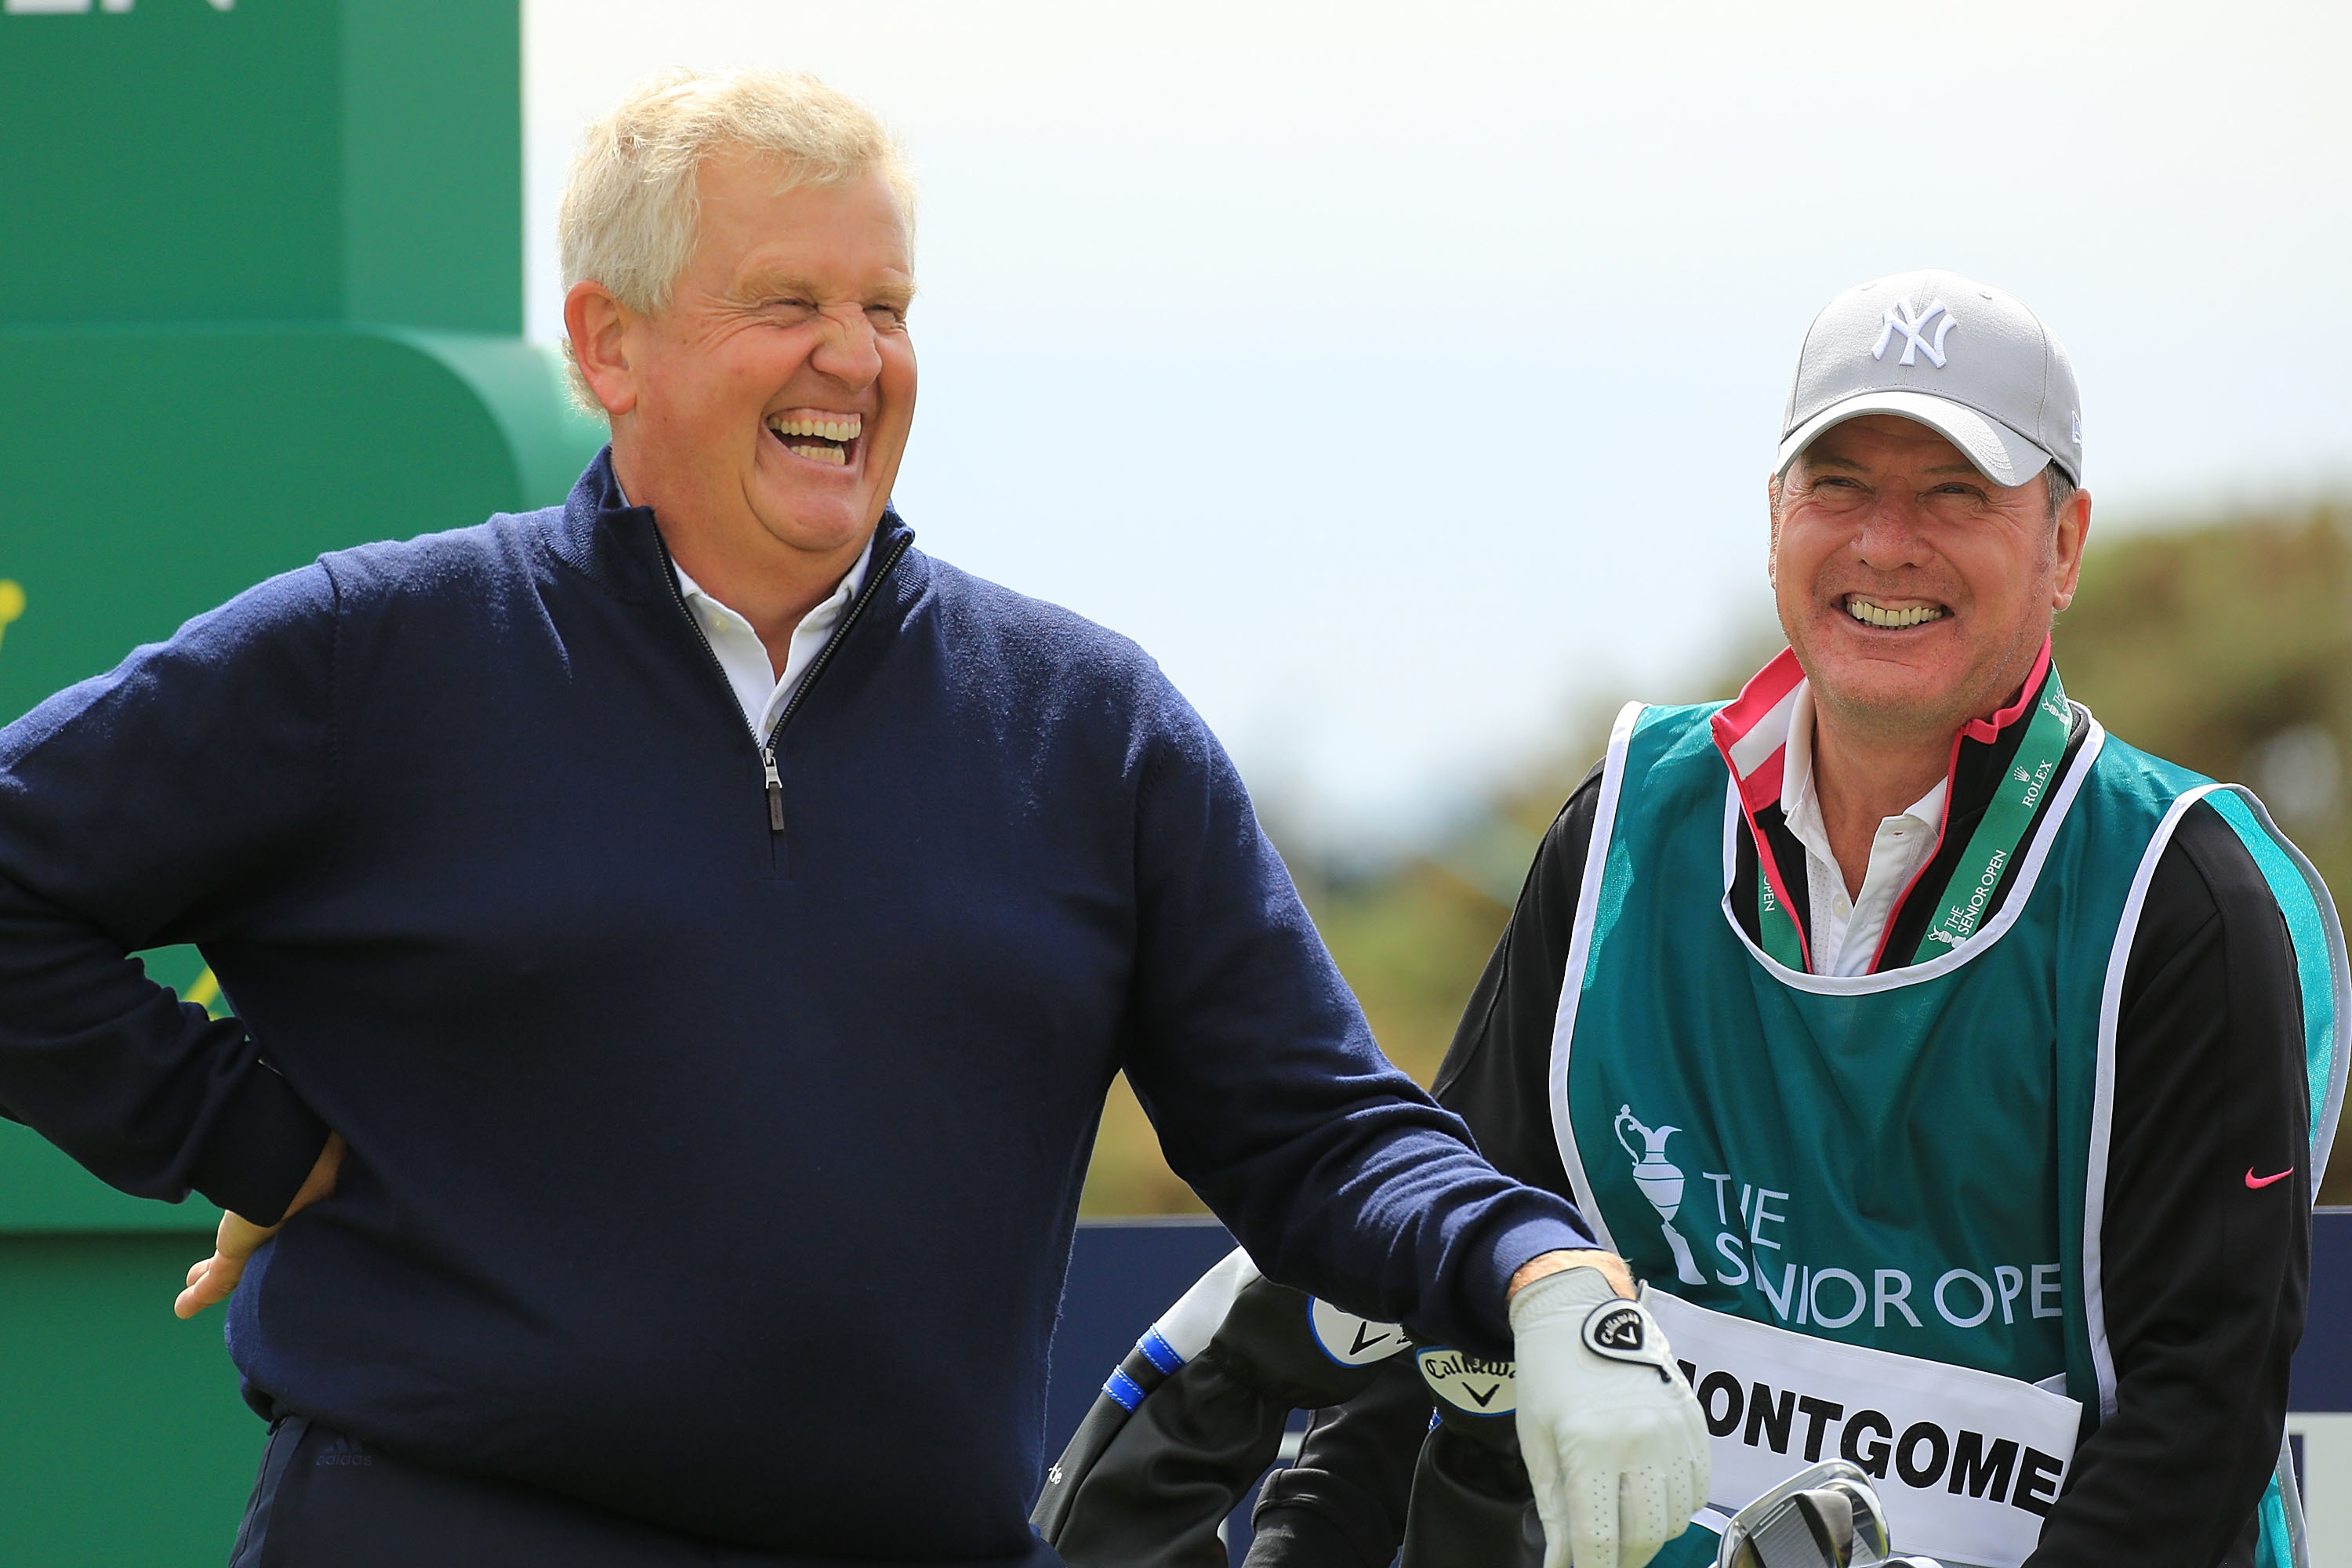 Colin Montgomerie of Scotland and caddy Alasatir MacLean in practice at st Andrews for the Senior Open.